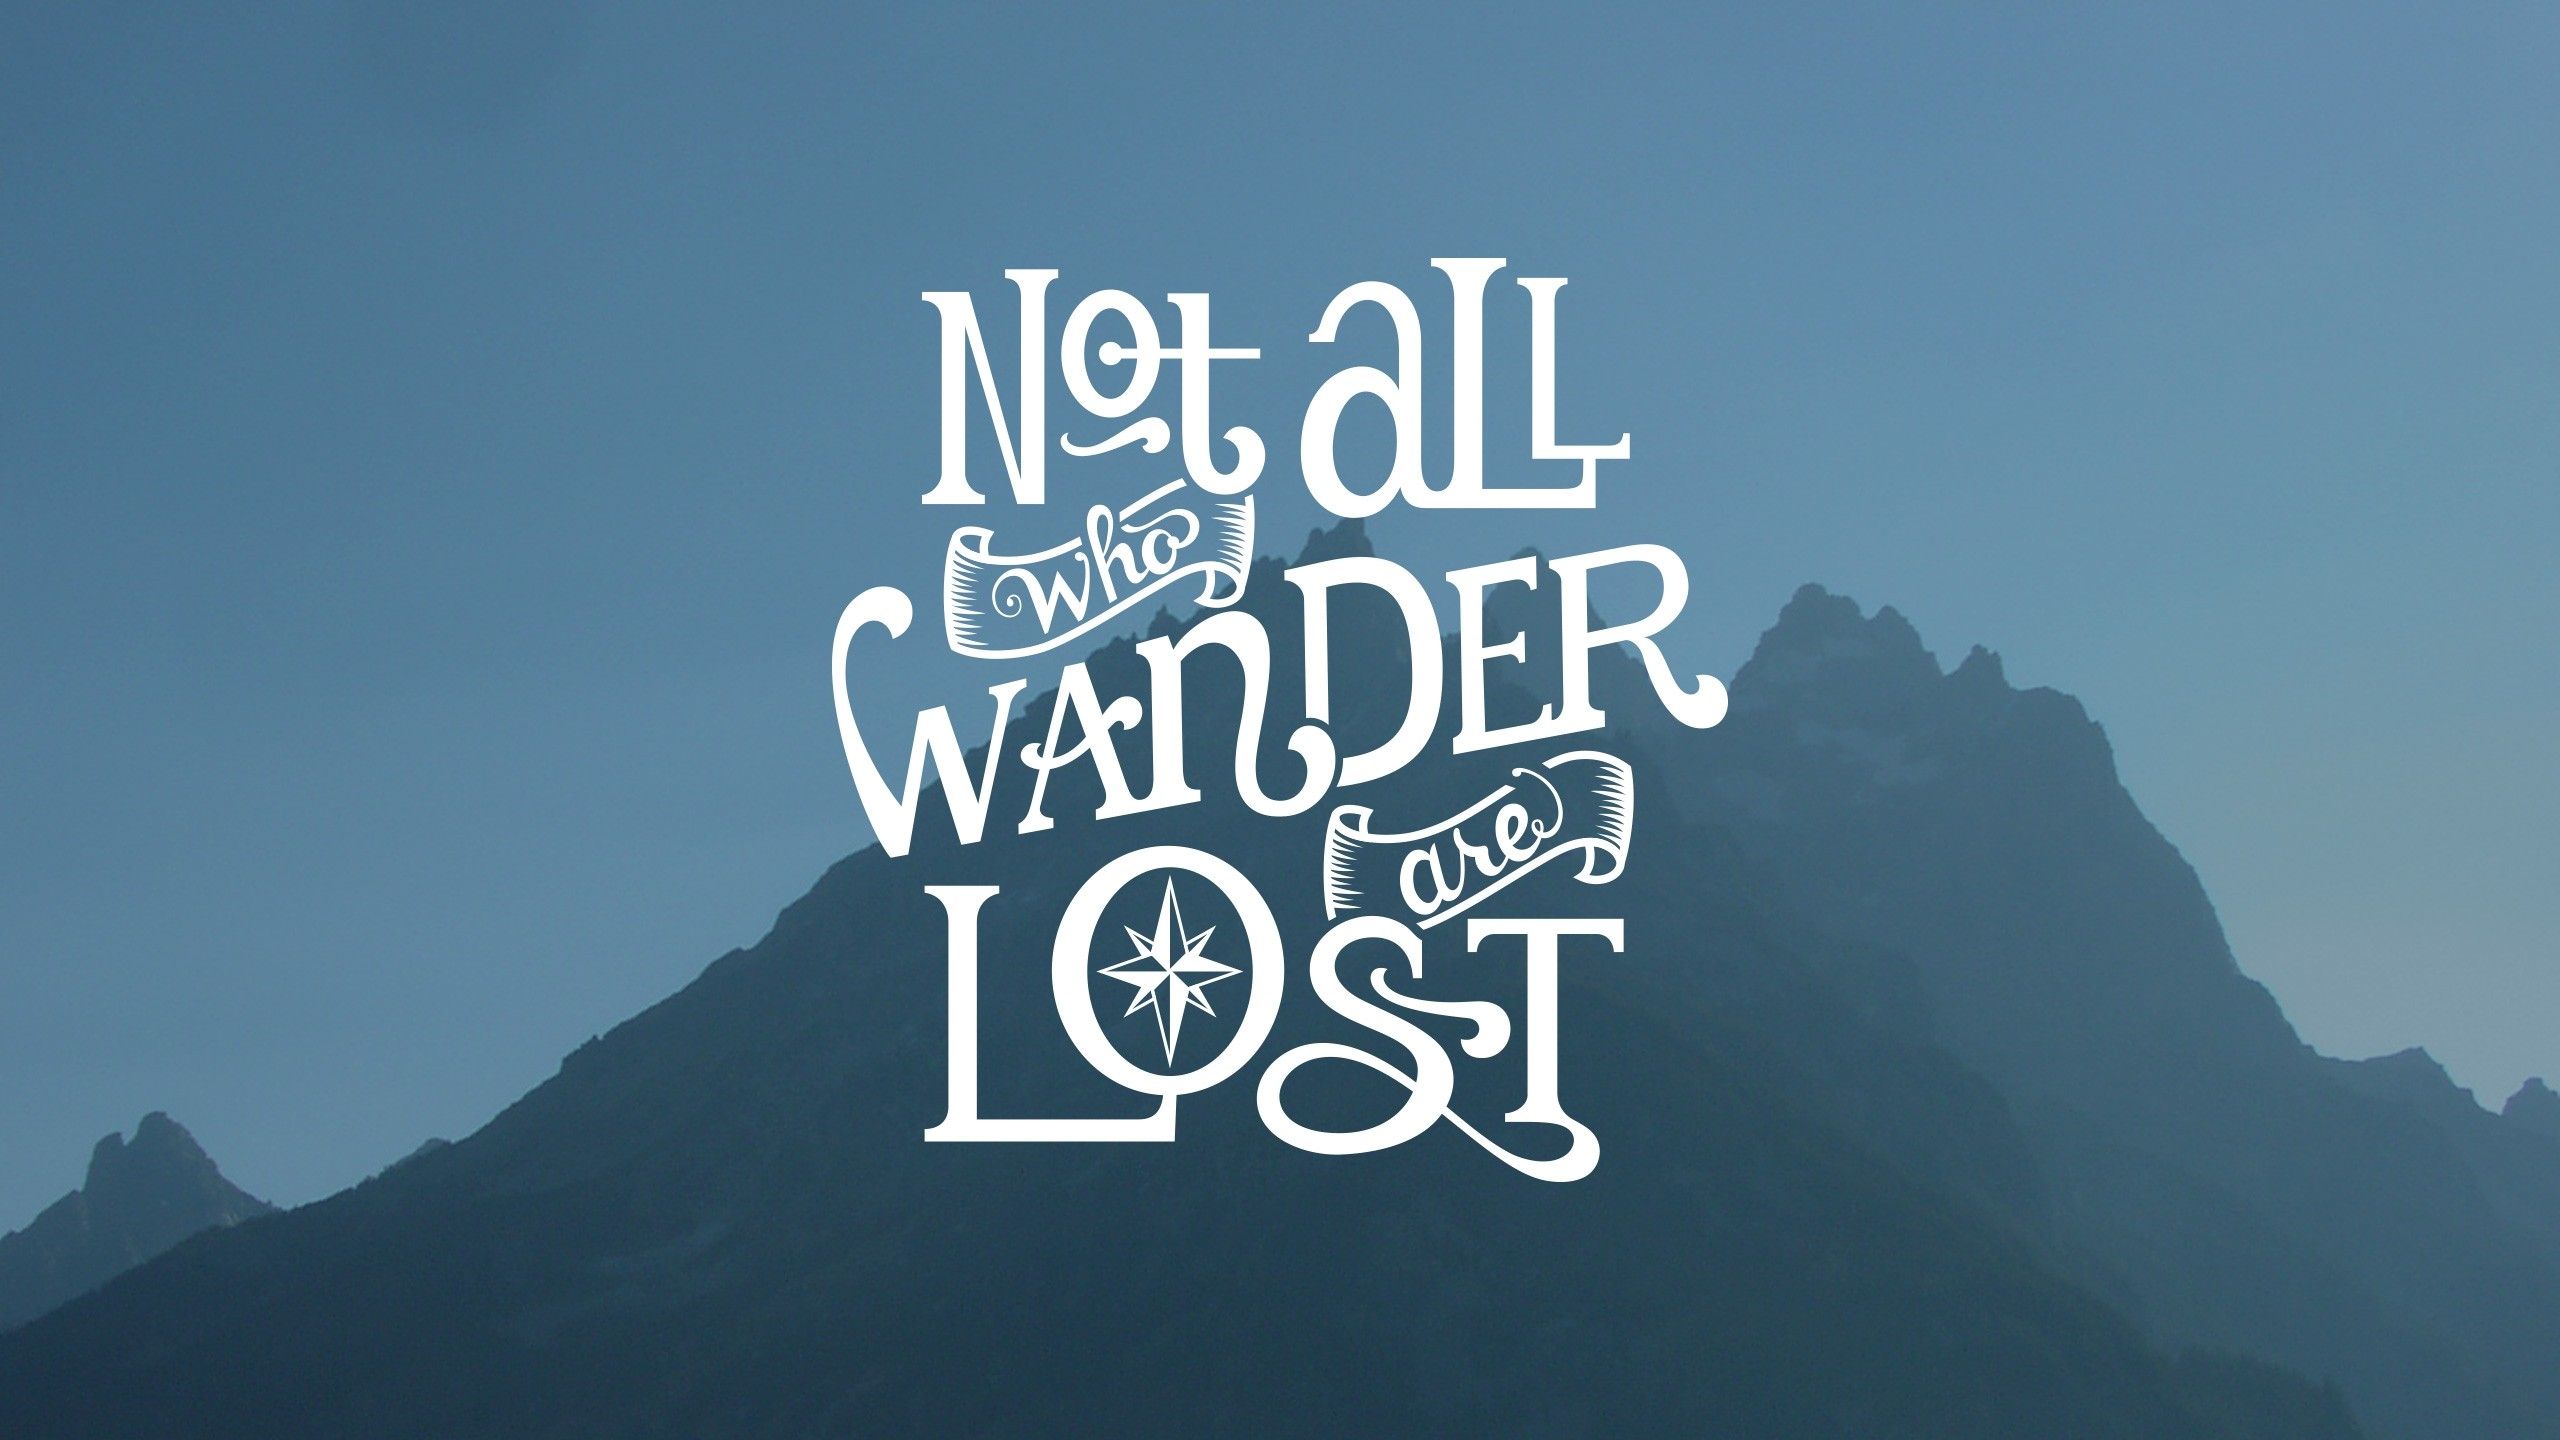 blue, mountains, quotes, typography, The Lord of the Rings, JRR Tolkien wallpaper